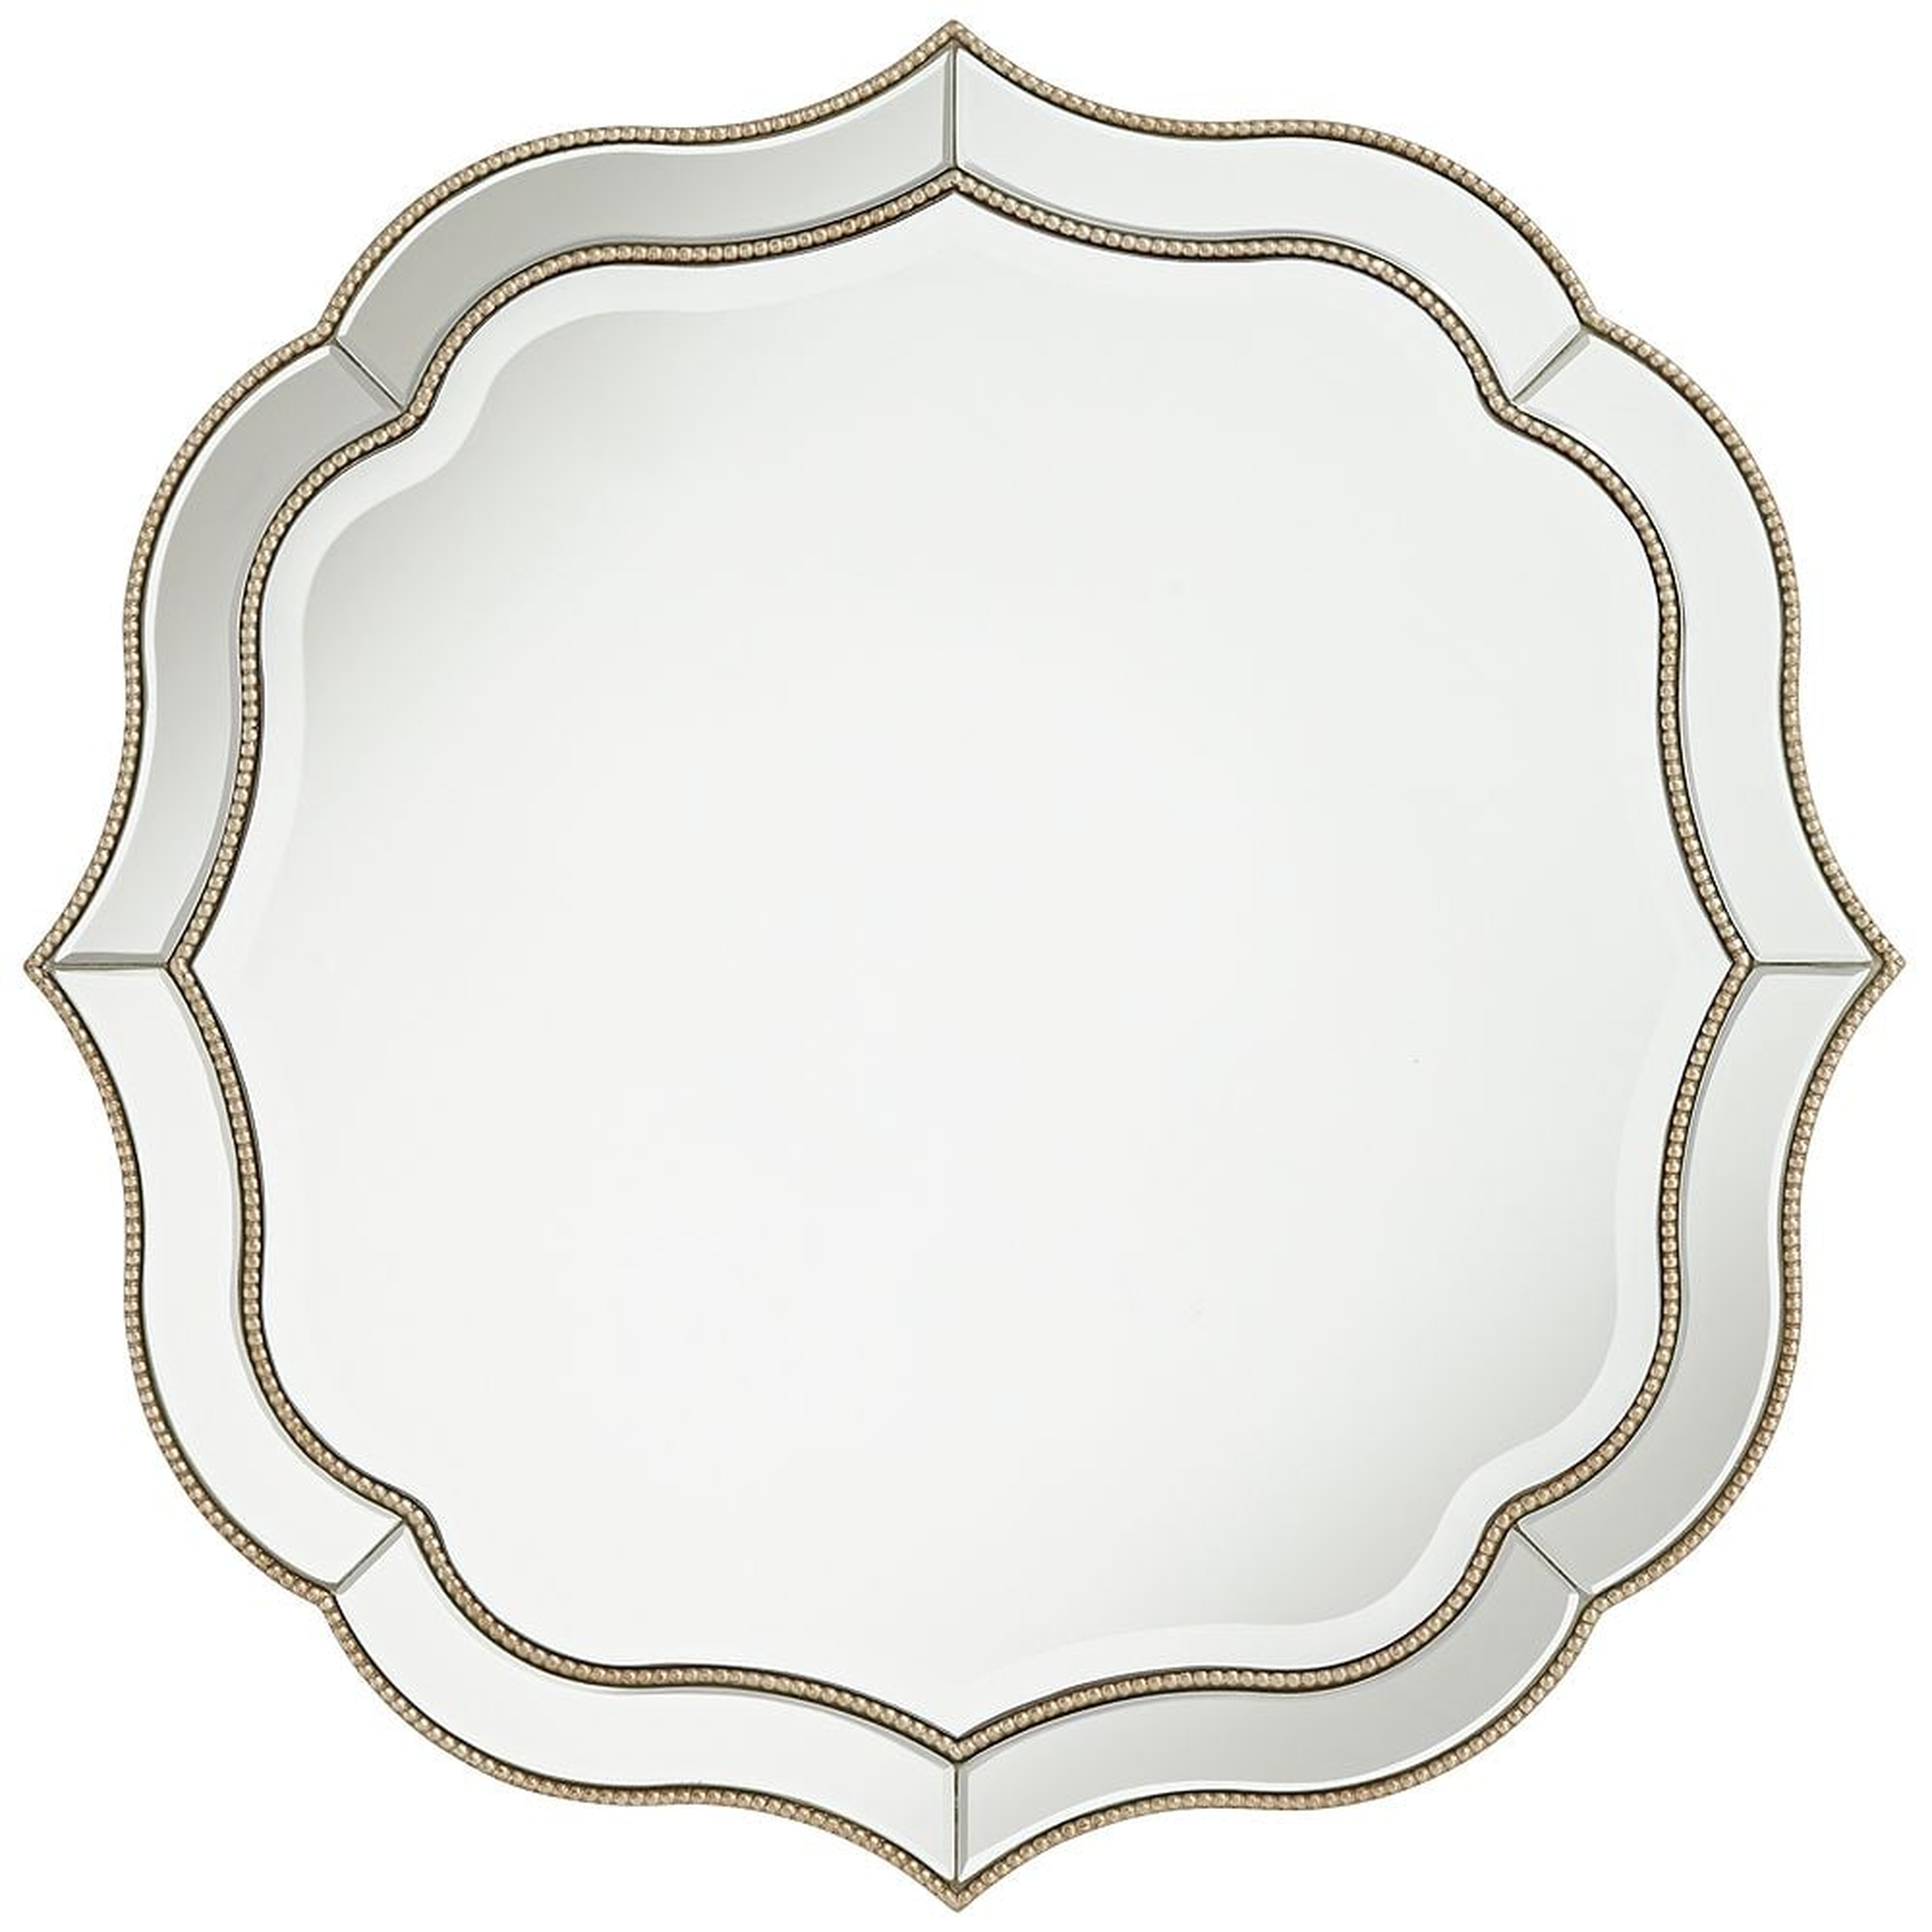 Laureen Antique Silver 32" Scalloped Round Wall Mirror - Style # 60H67 - Lamps Plus